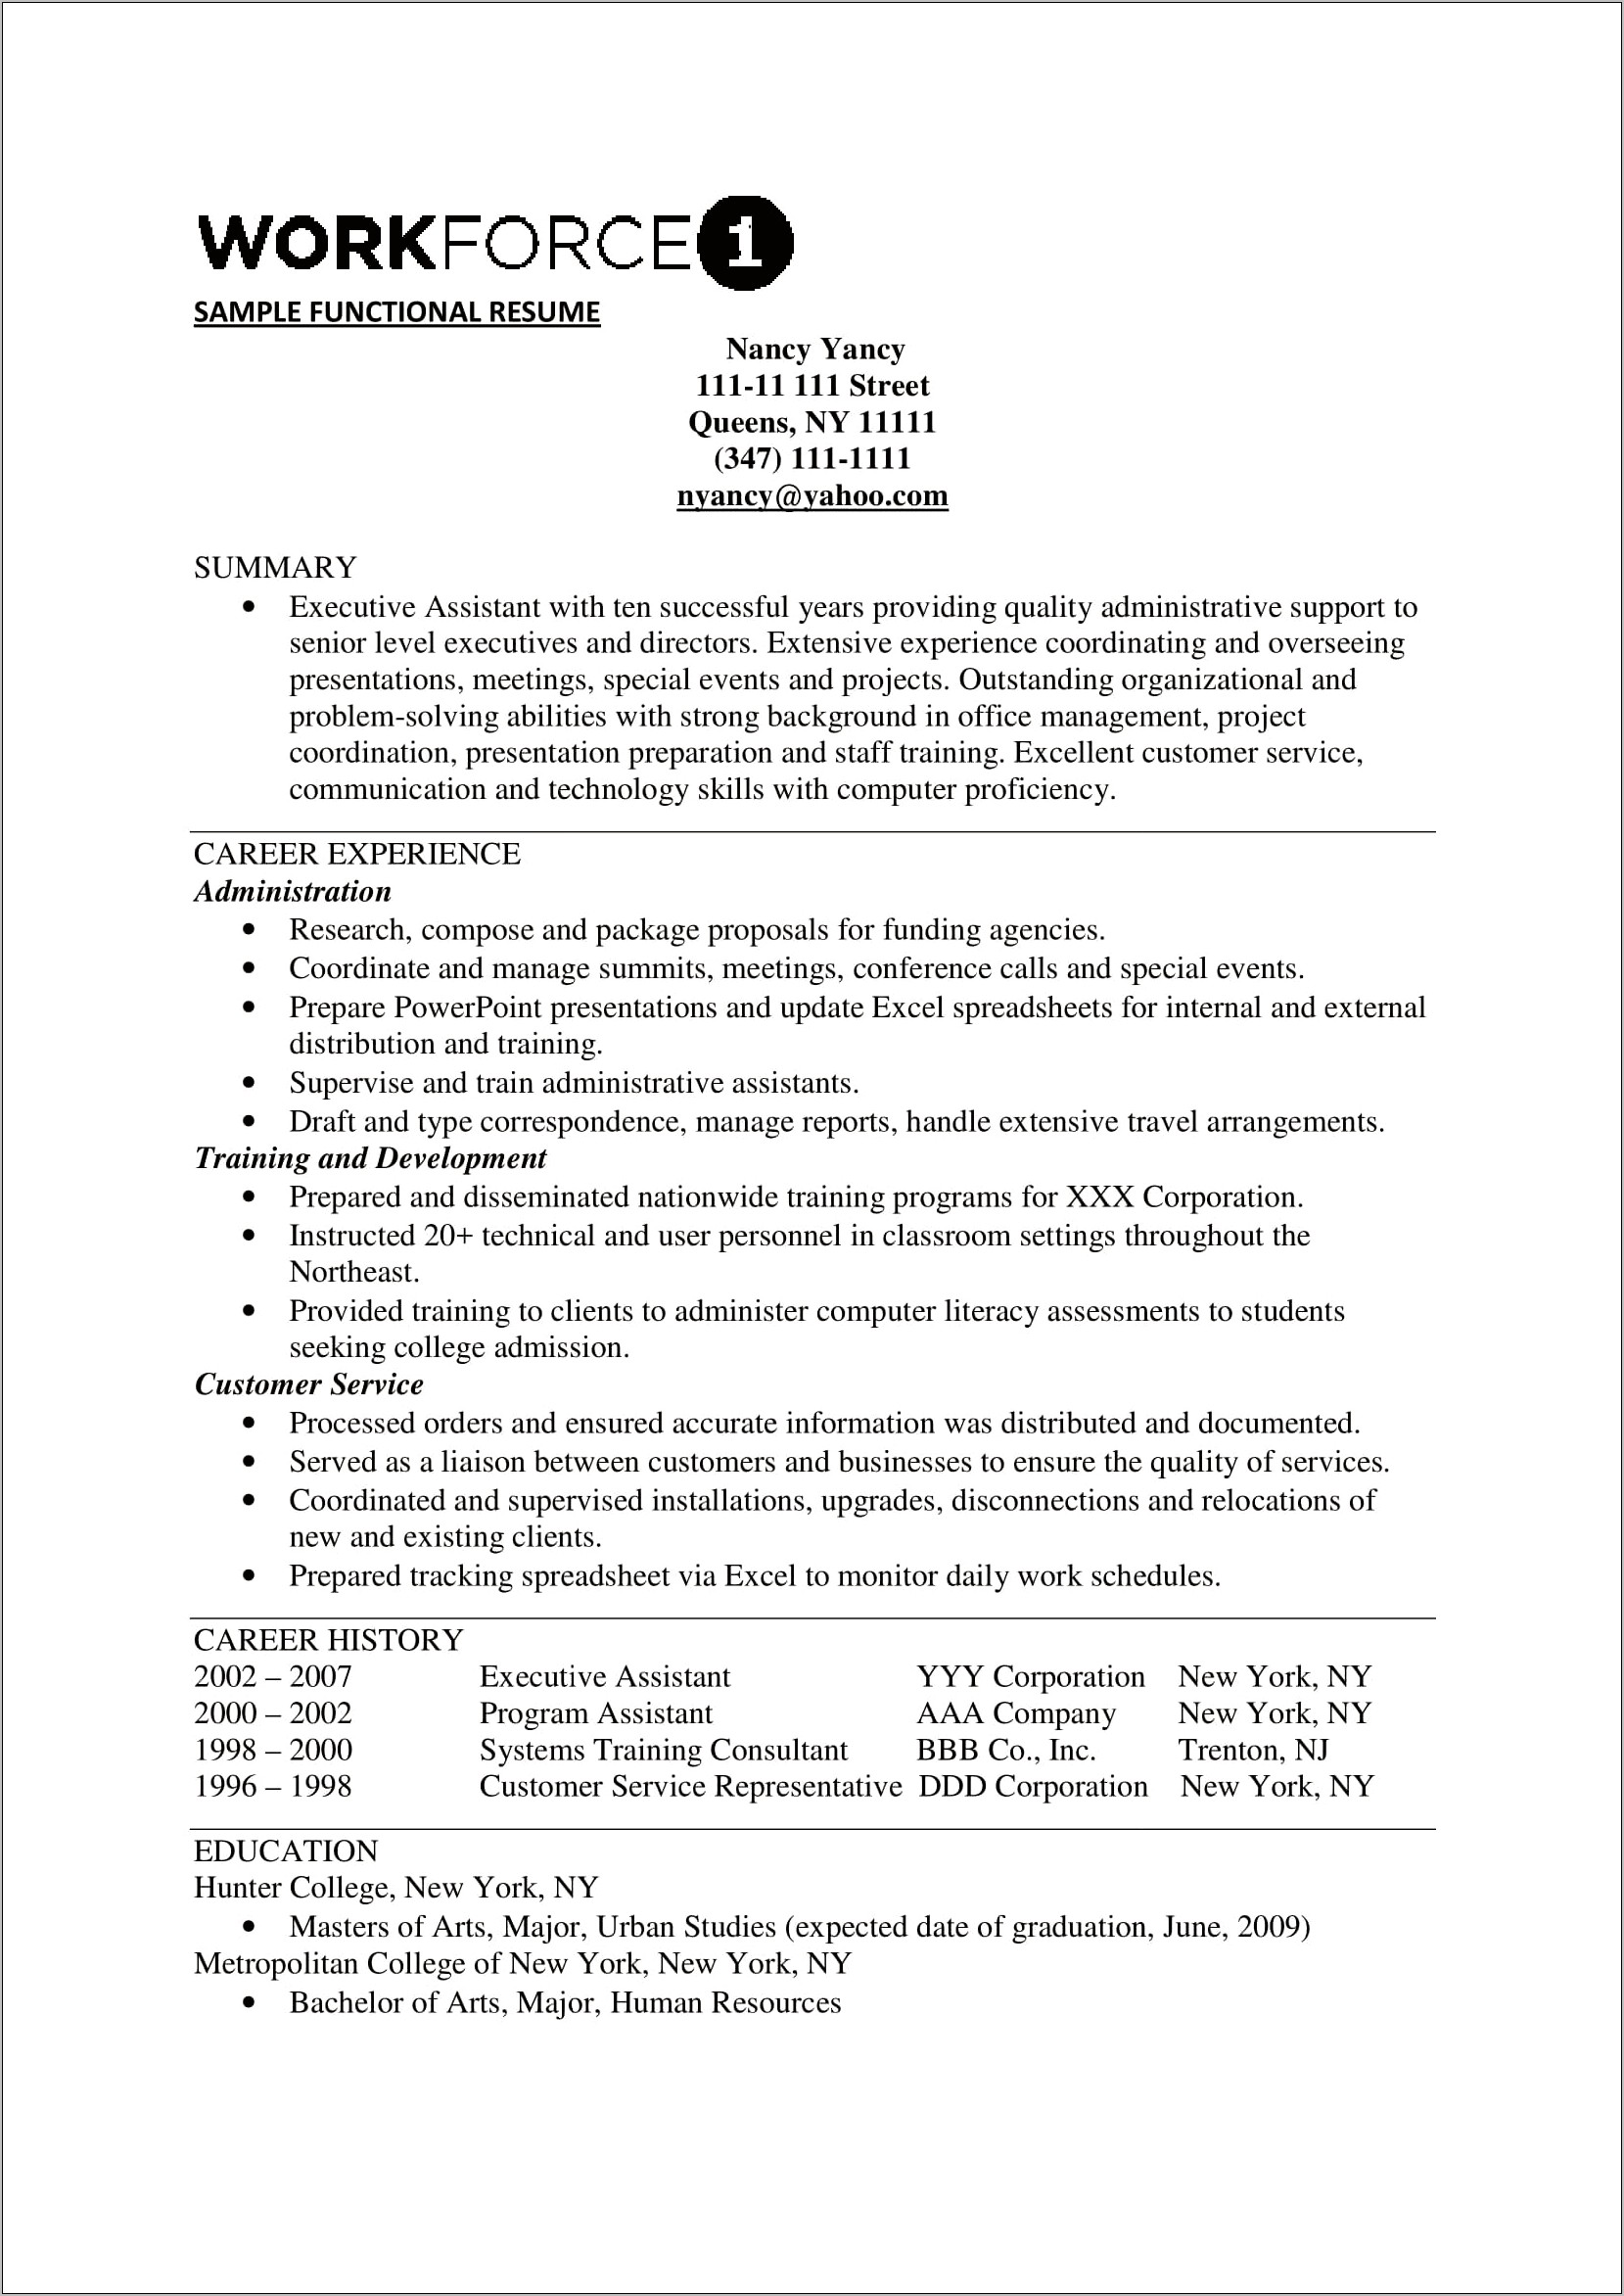 Short Summary About Myself For Resume